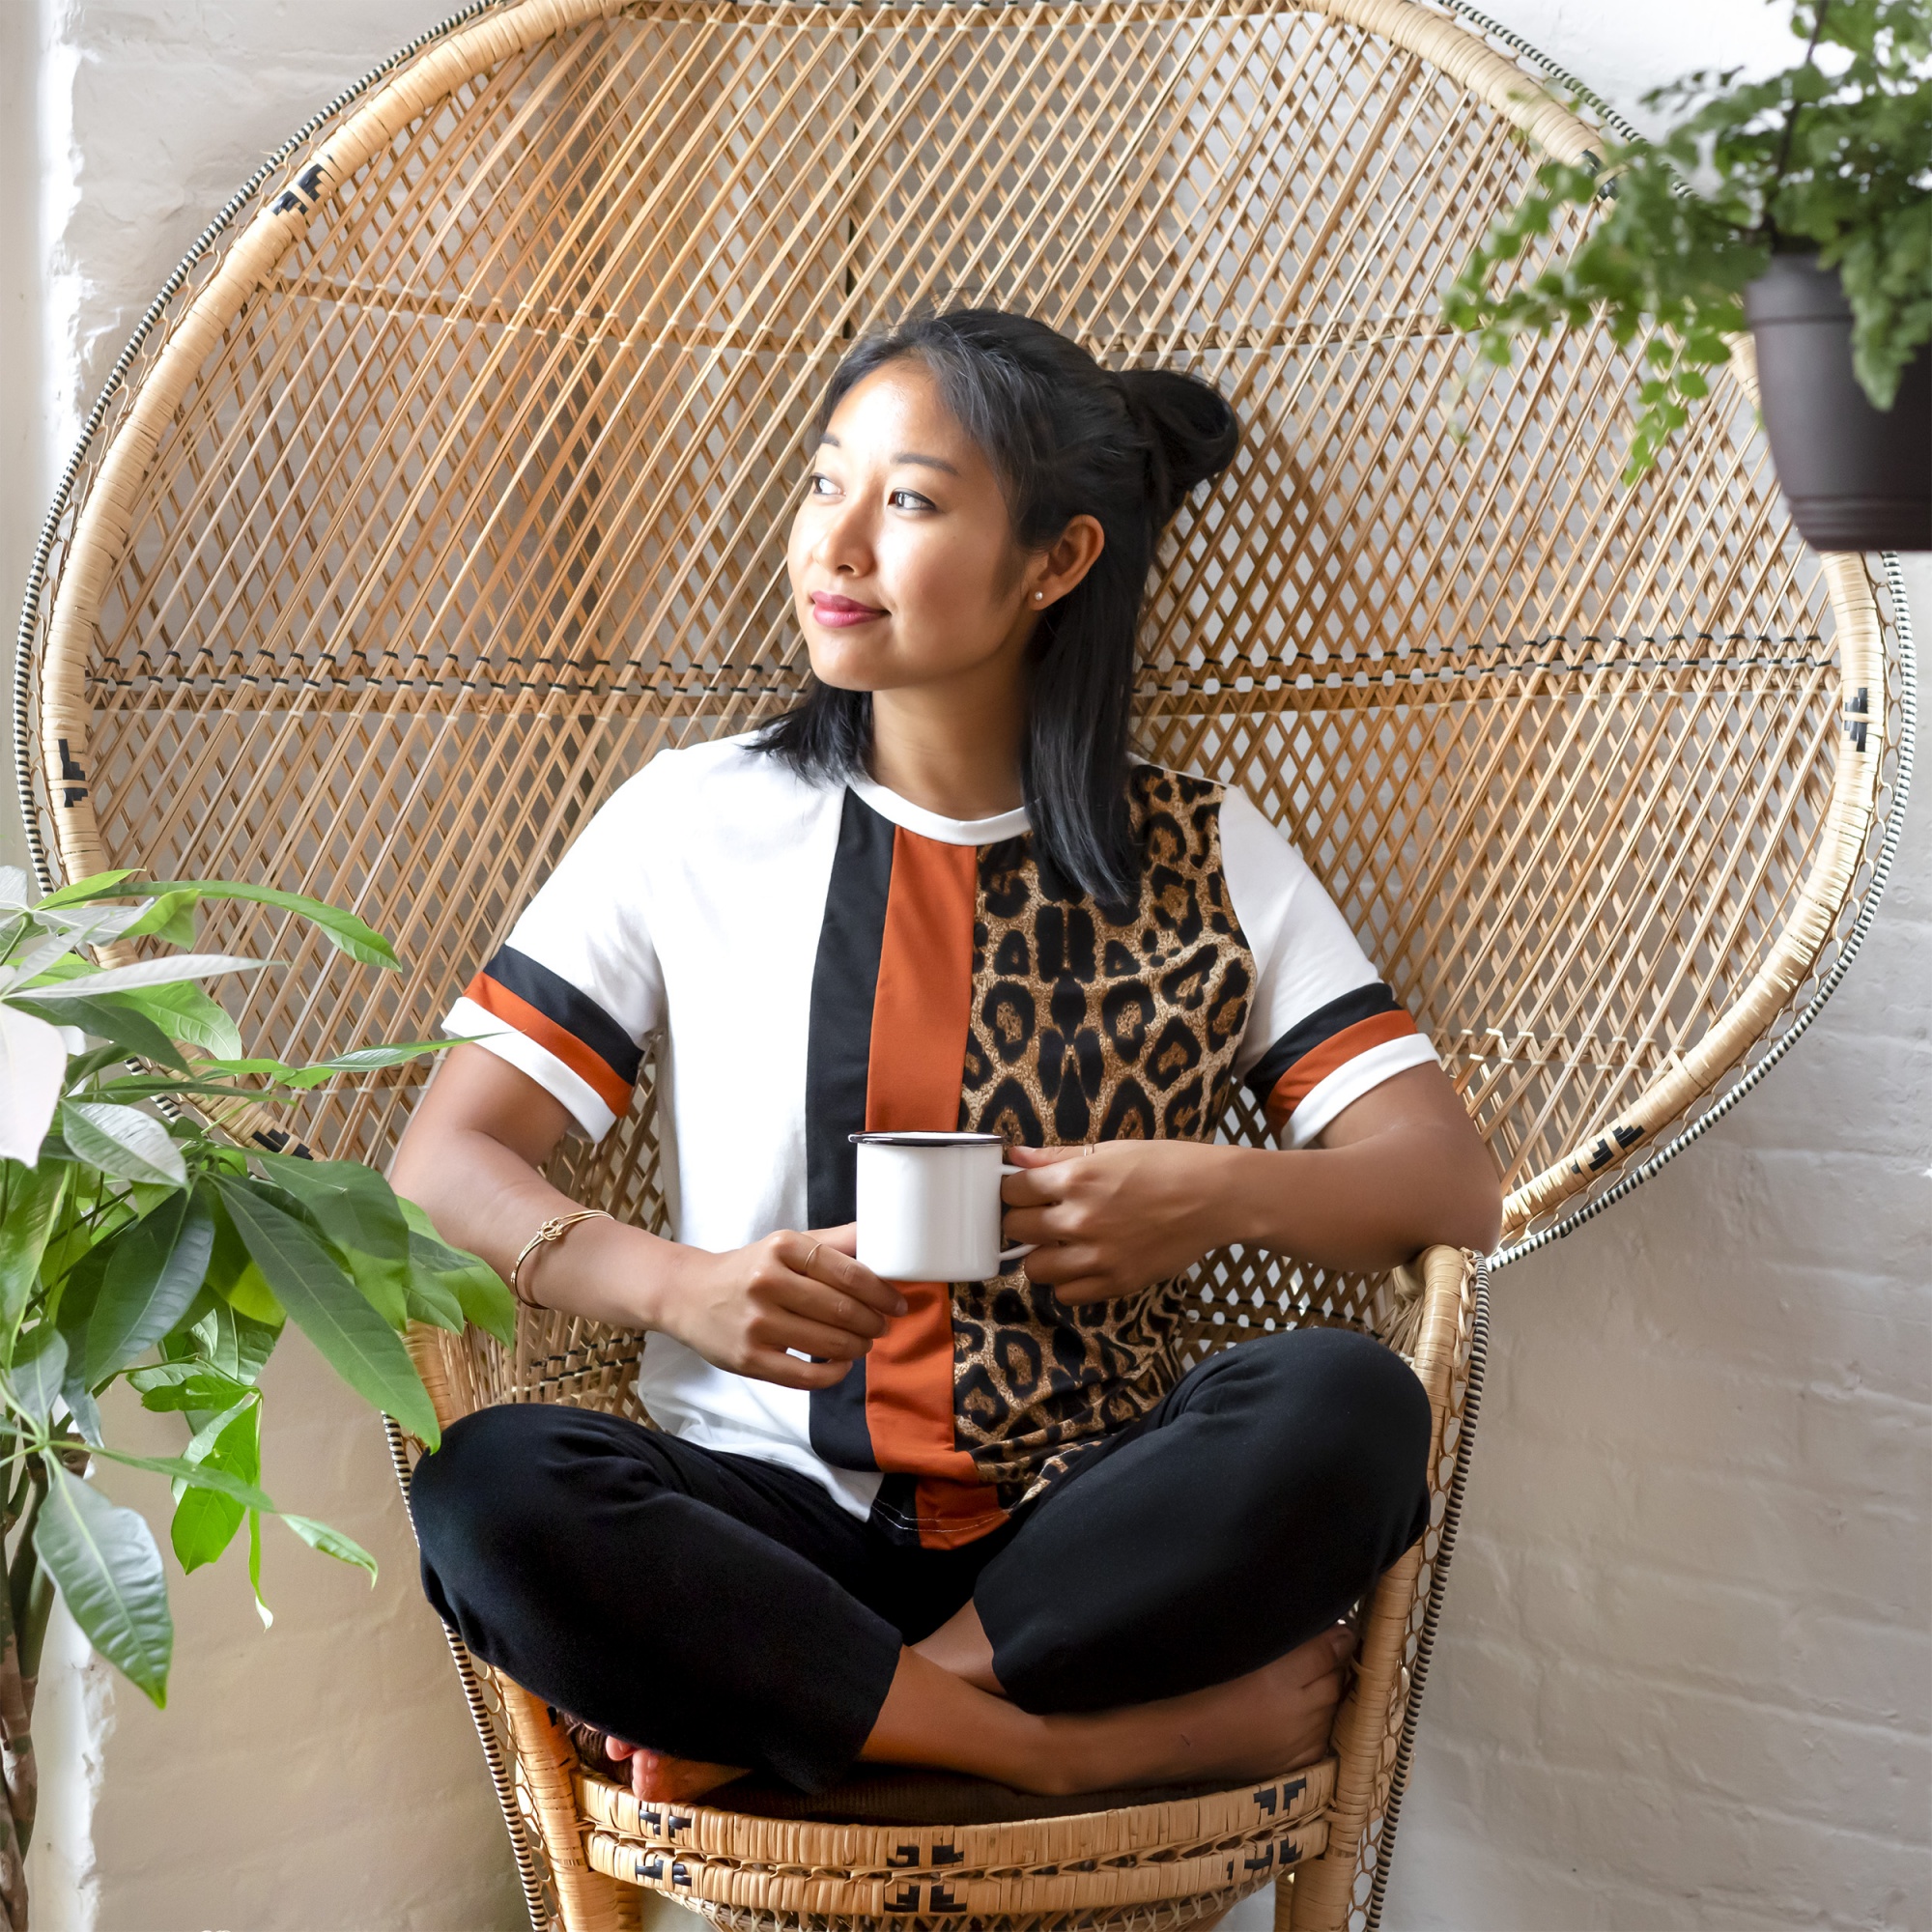 self-care and self-love, asian woman sitting crosslegged in rattan chair holding mug and thinking positive thoughts